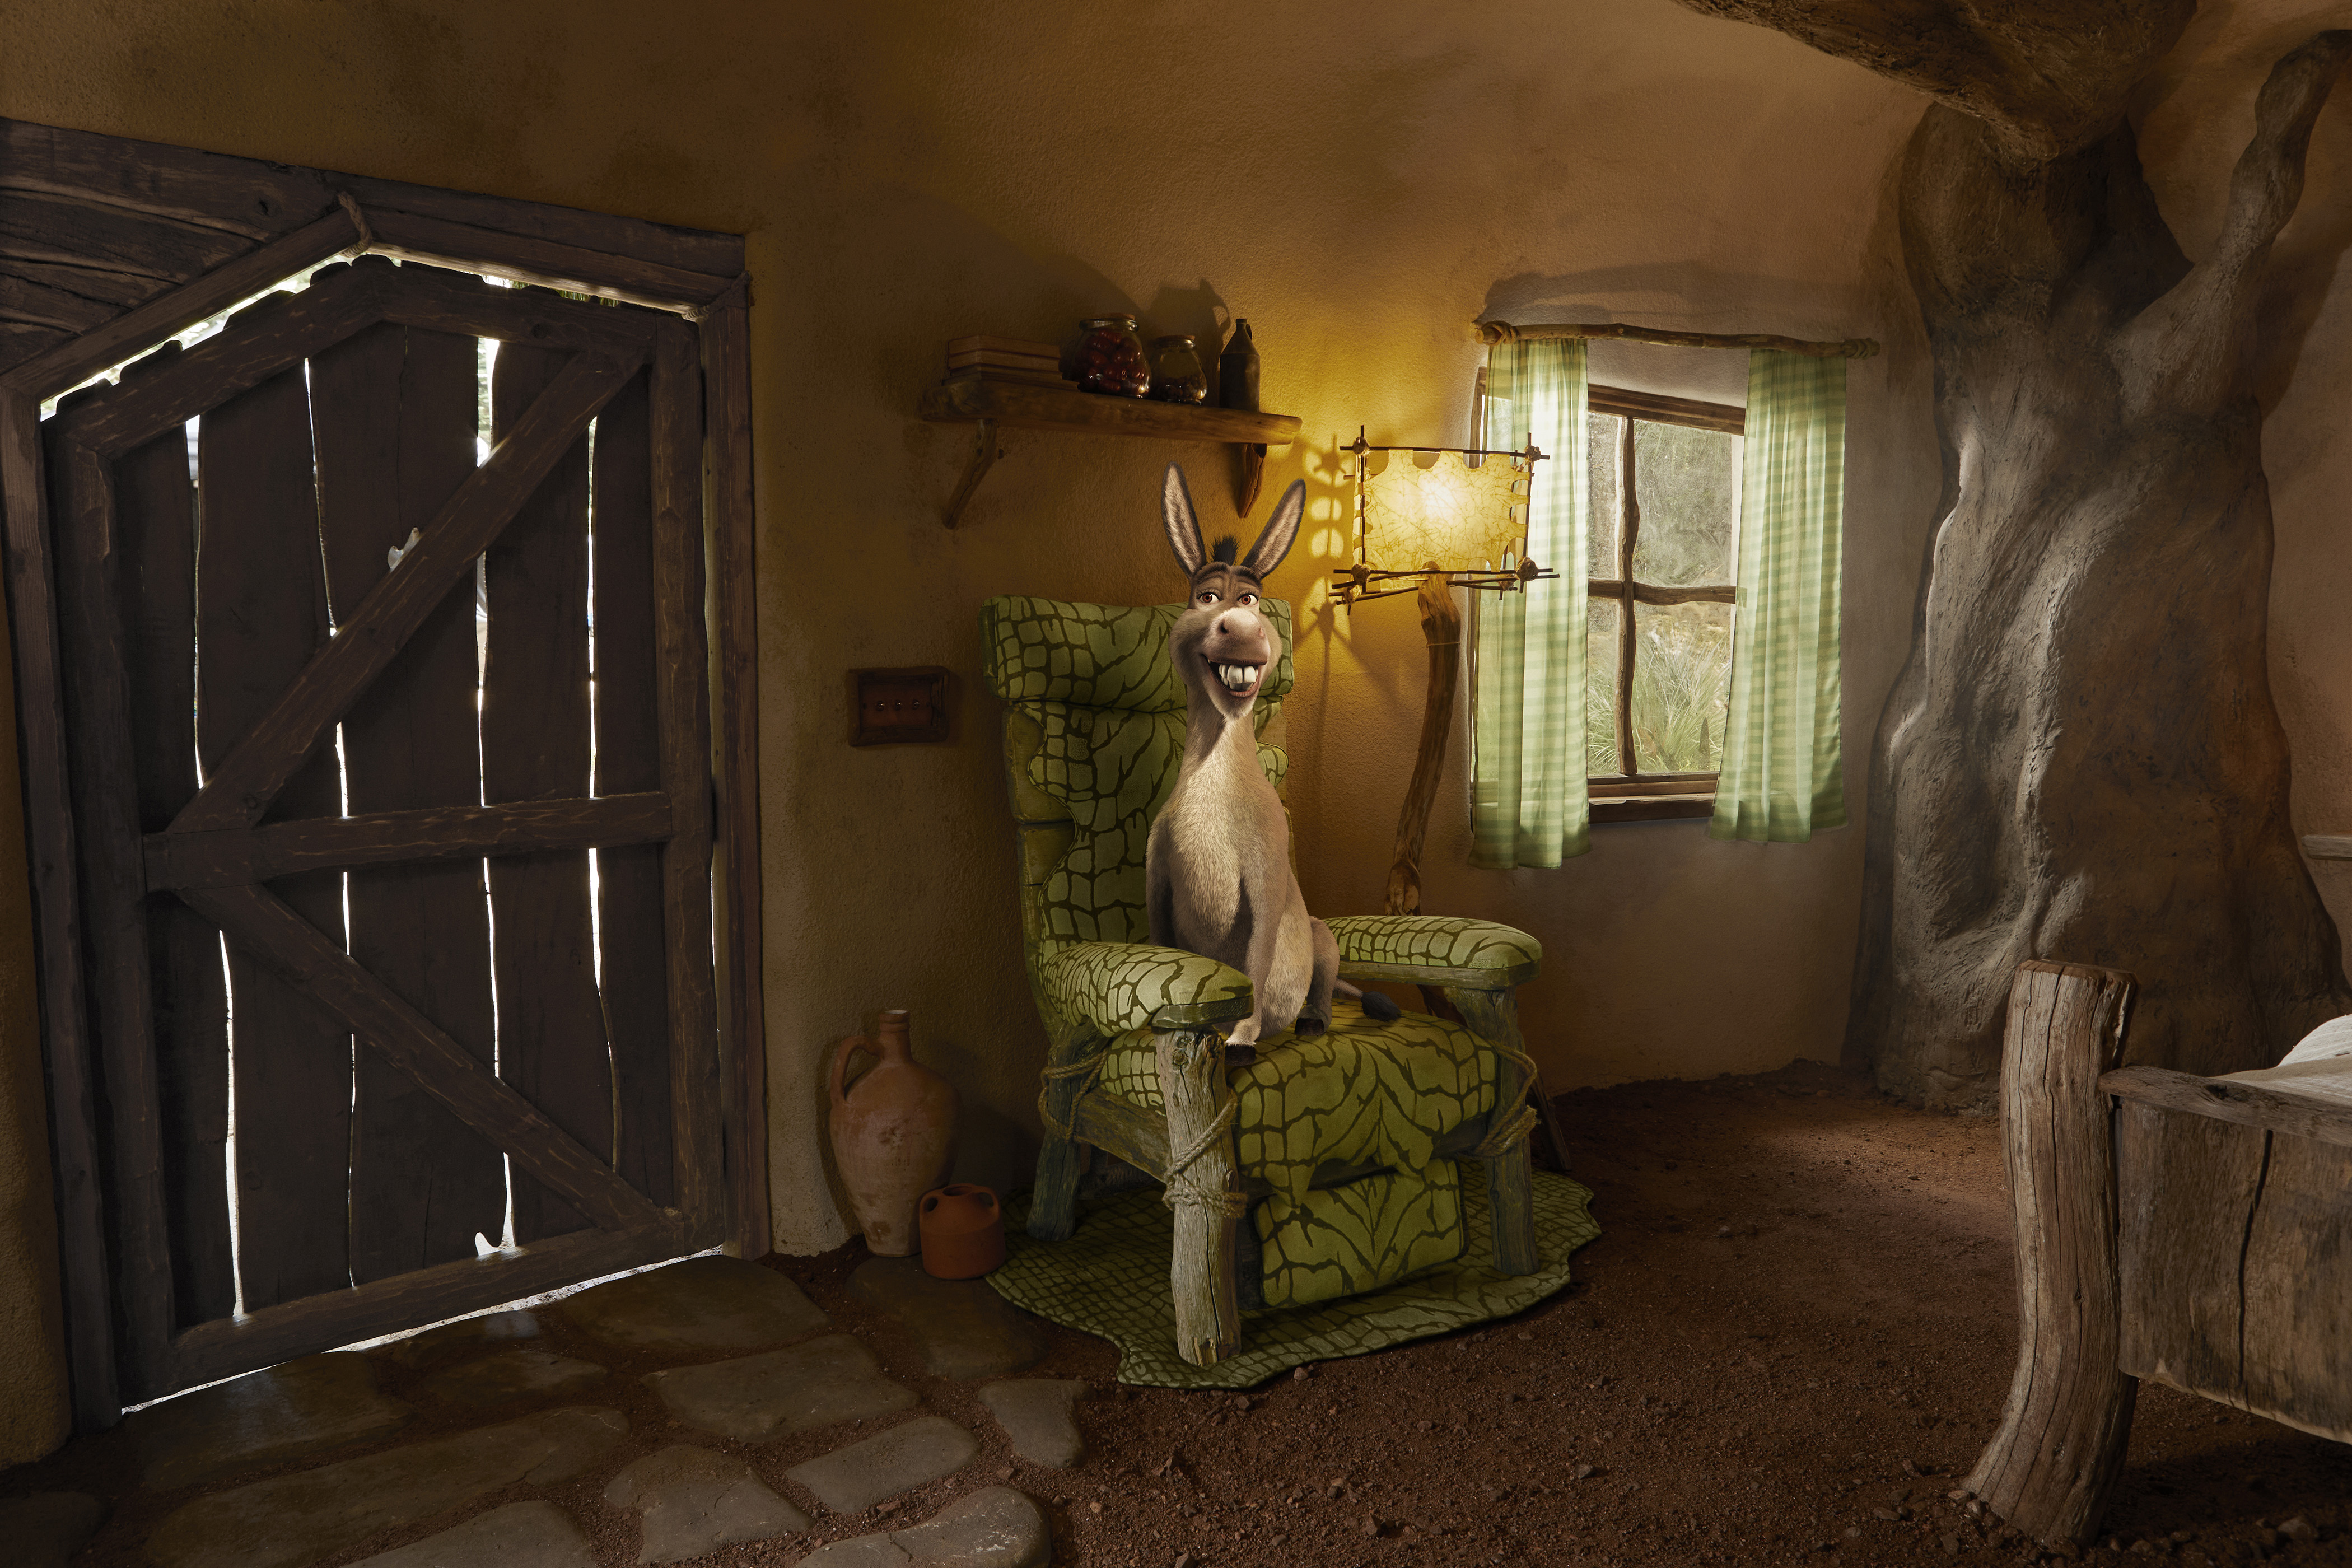 A smiling Donkey seated on an armchair inside Shrek's Swamp